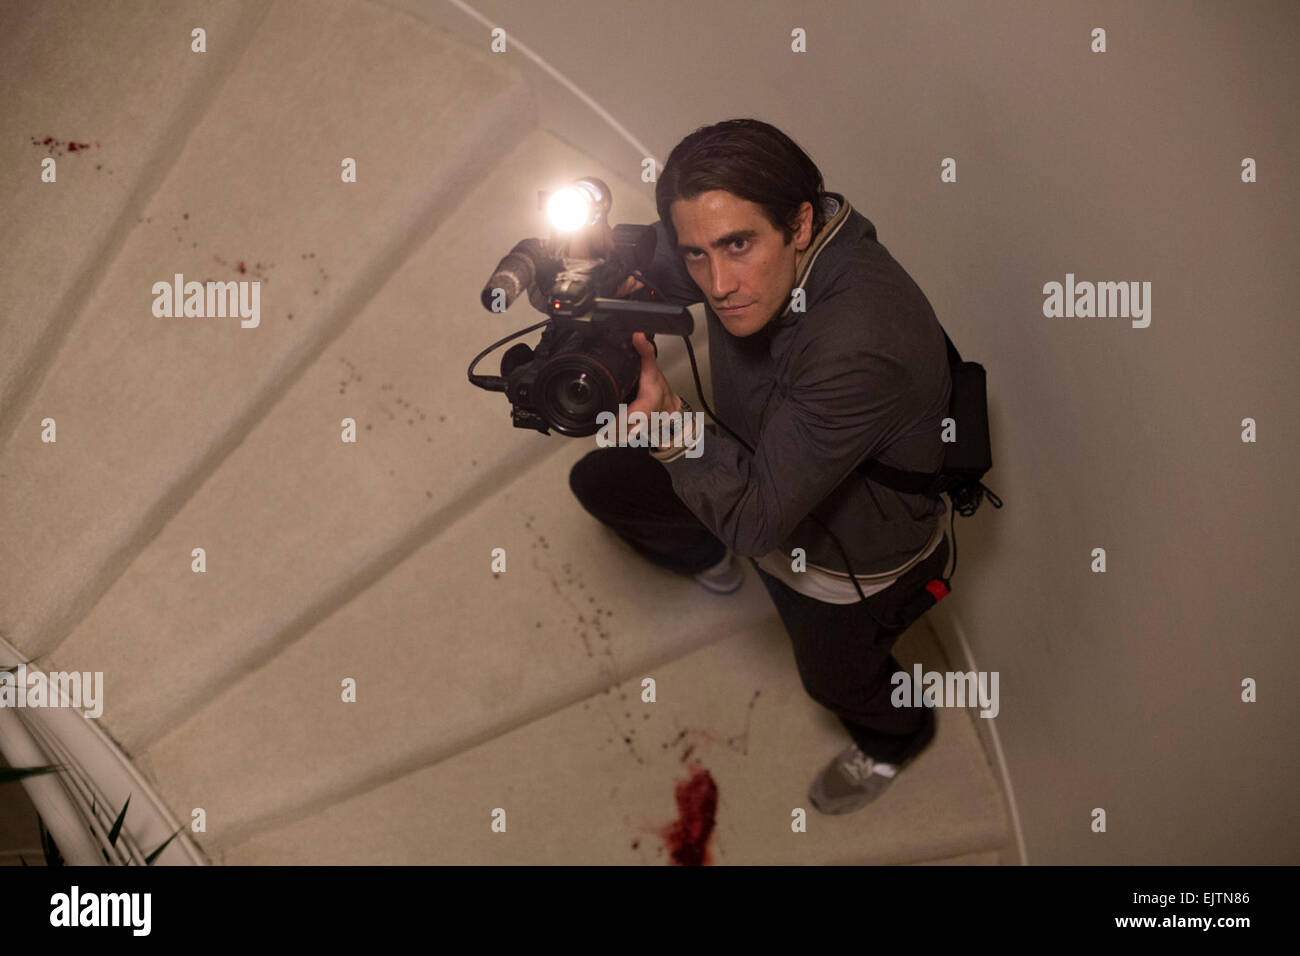 Nightcrawler (Film, Thriller): Reviews, Ratings, Cast and Crew